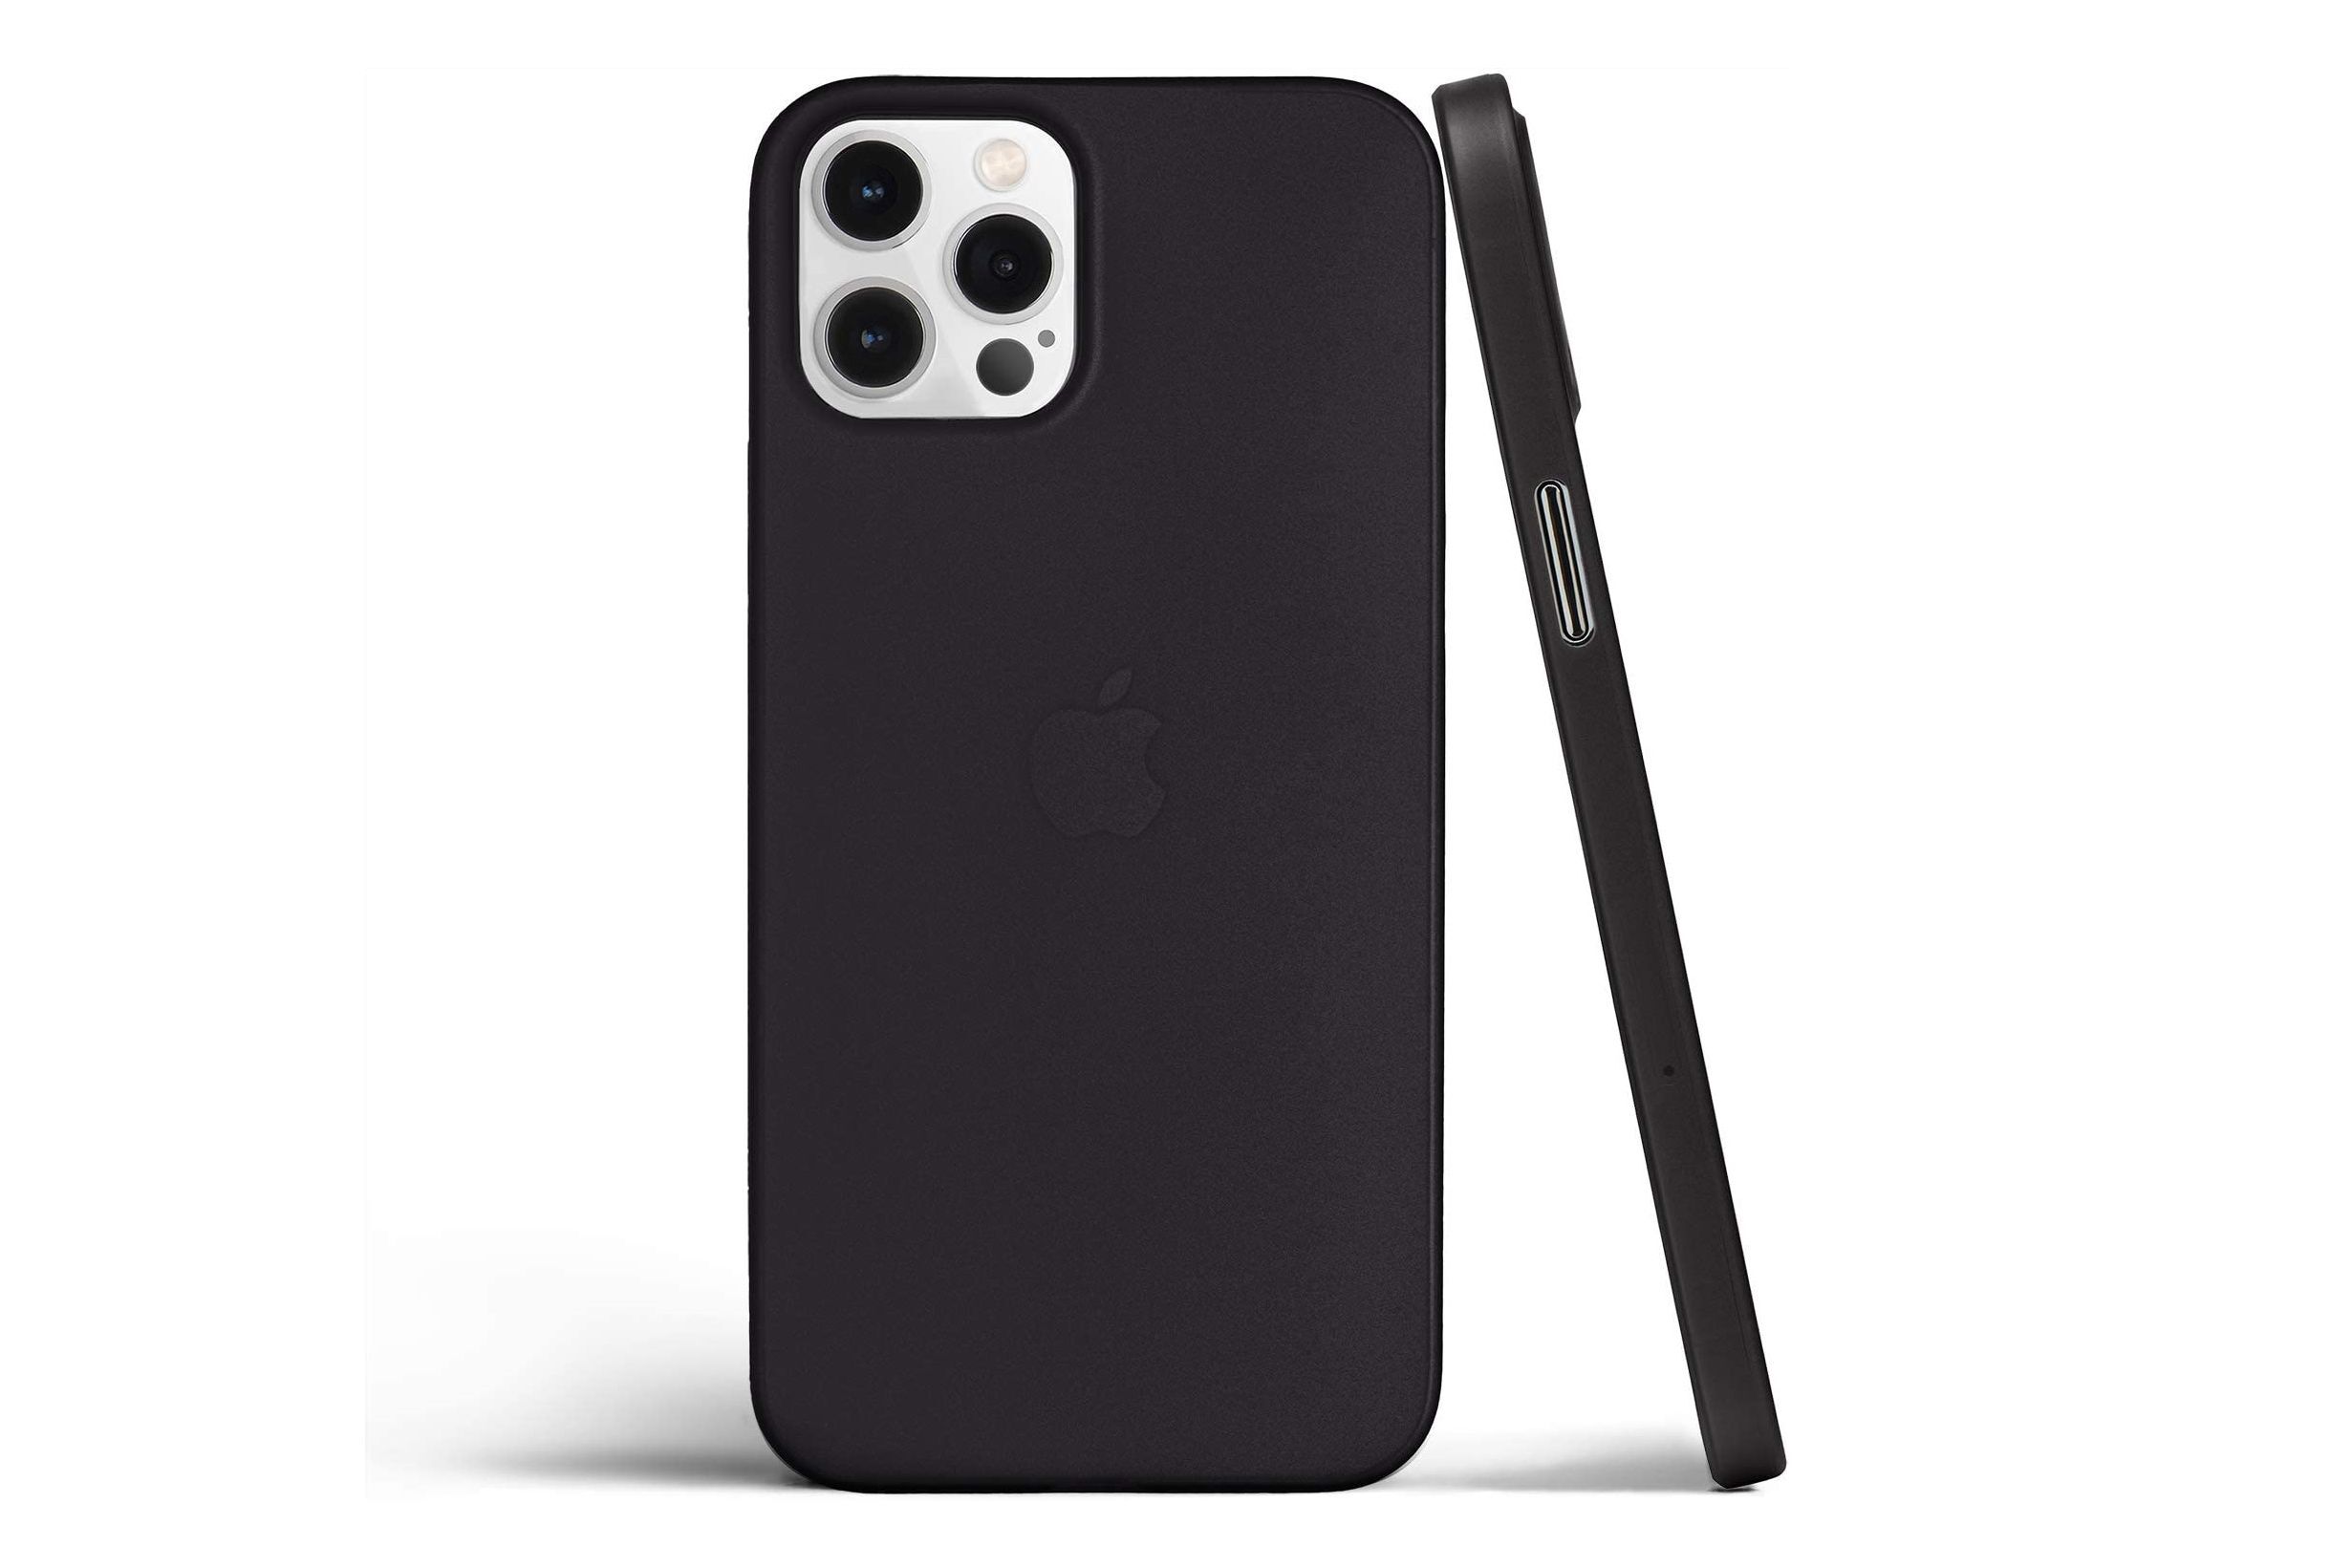 Totallee Super Thin iPhone 12 Pro Max case - The best iPhone 12 Pro Max cases - our top list